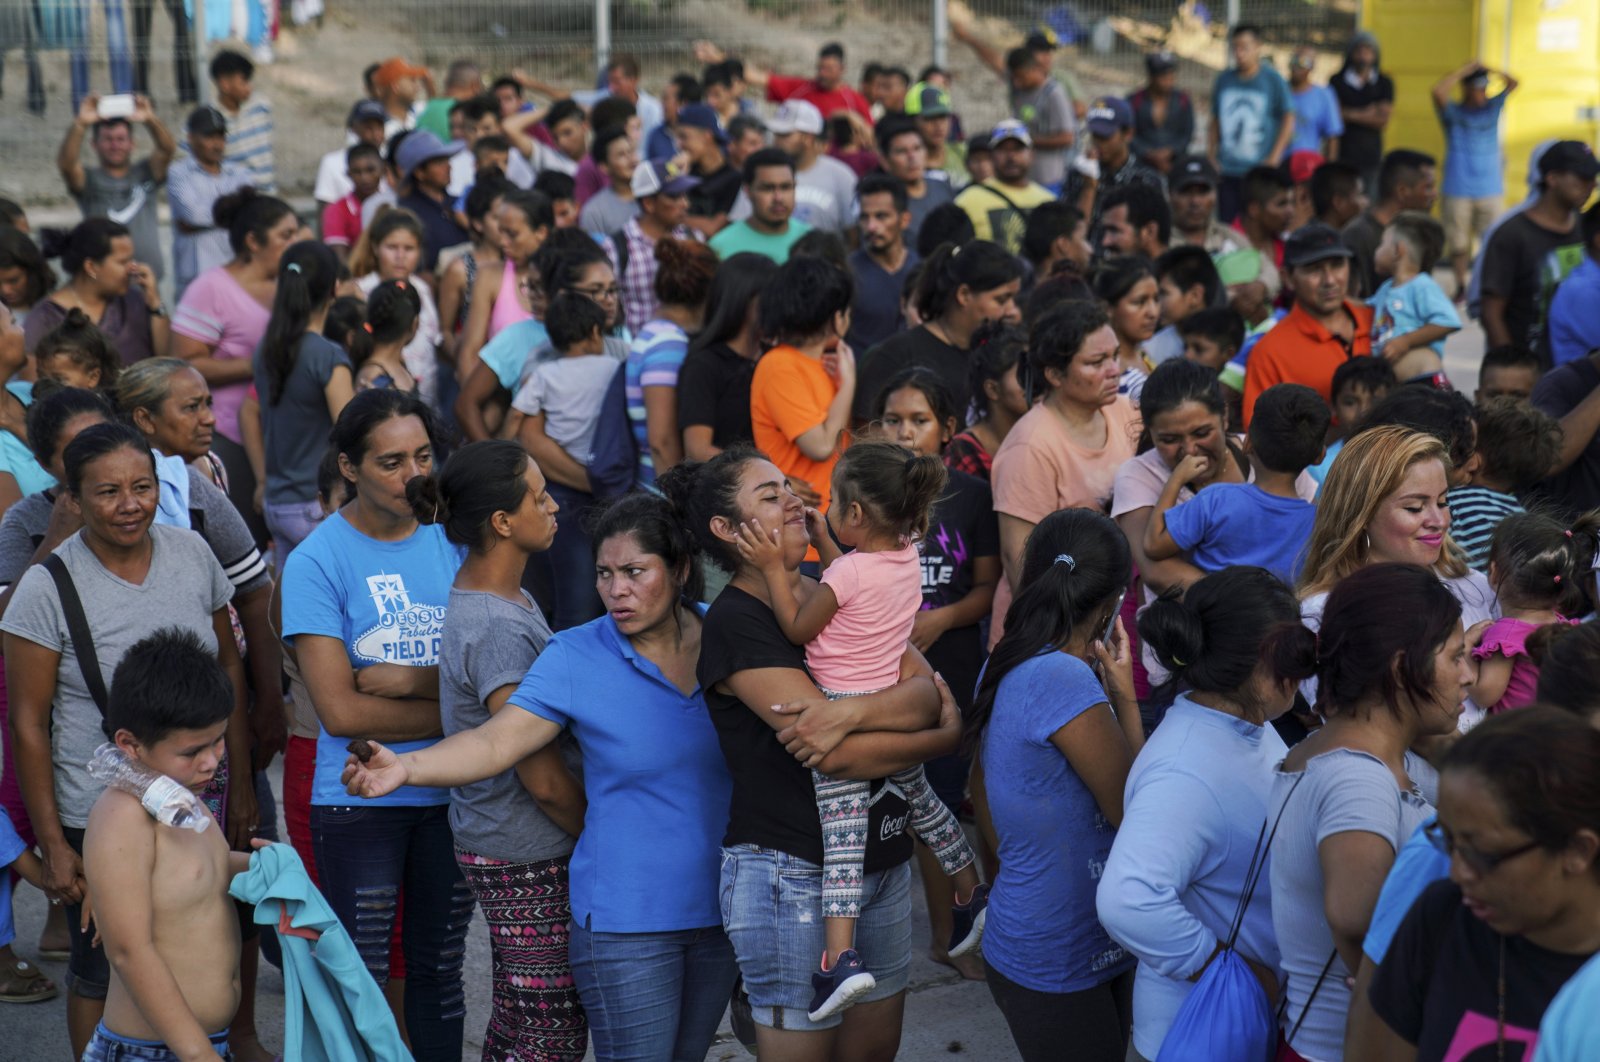 Migrants, many of whom were returned to Mexico under the Trump administration's "Remain in Mexico" policy, wait in line to get a meal in an encampment near the Gateway International Bridge in Matamoros, Mexico, Aug. 30, 2019. (AP Photo)